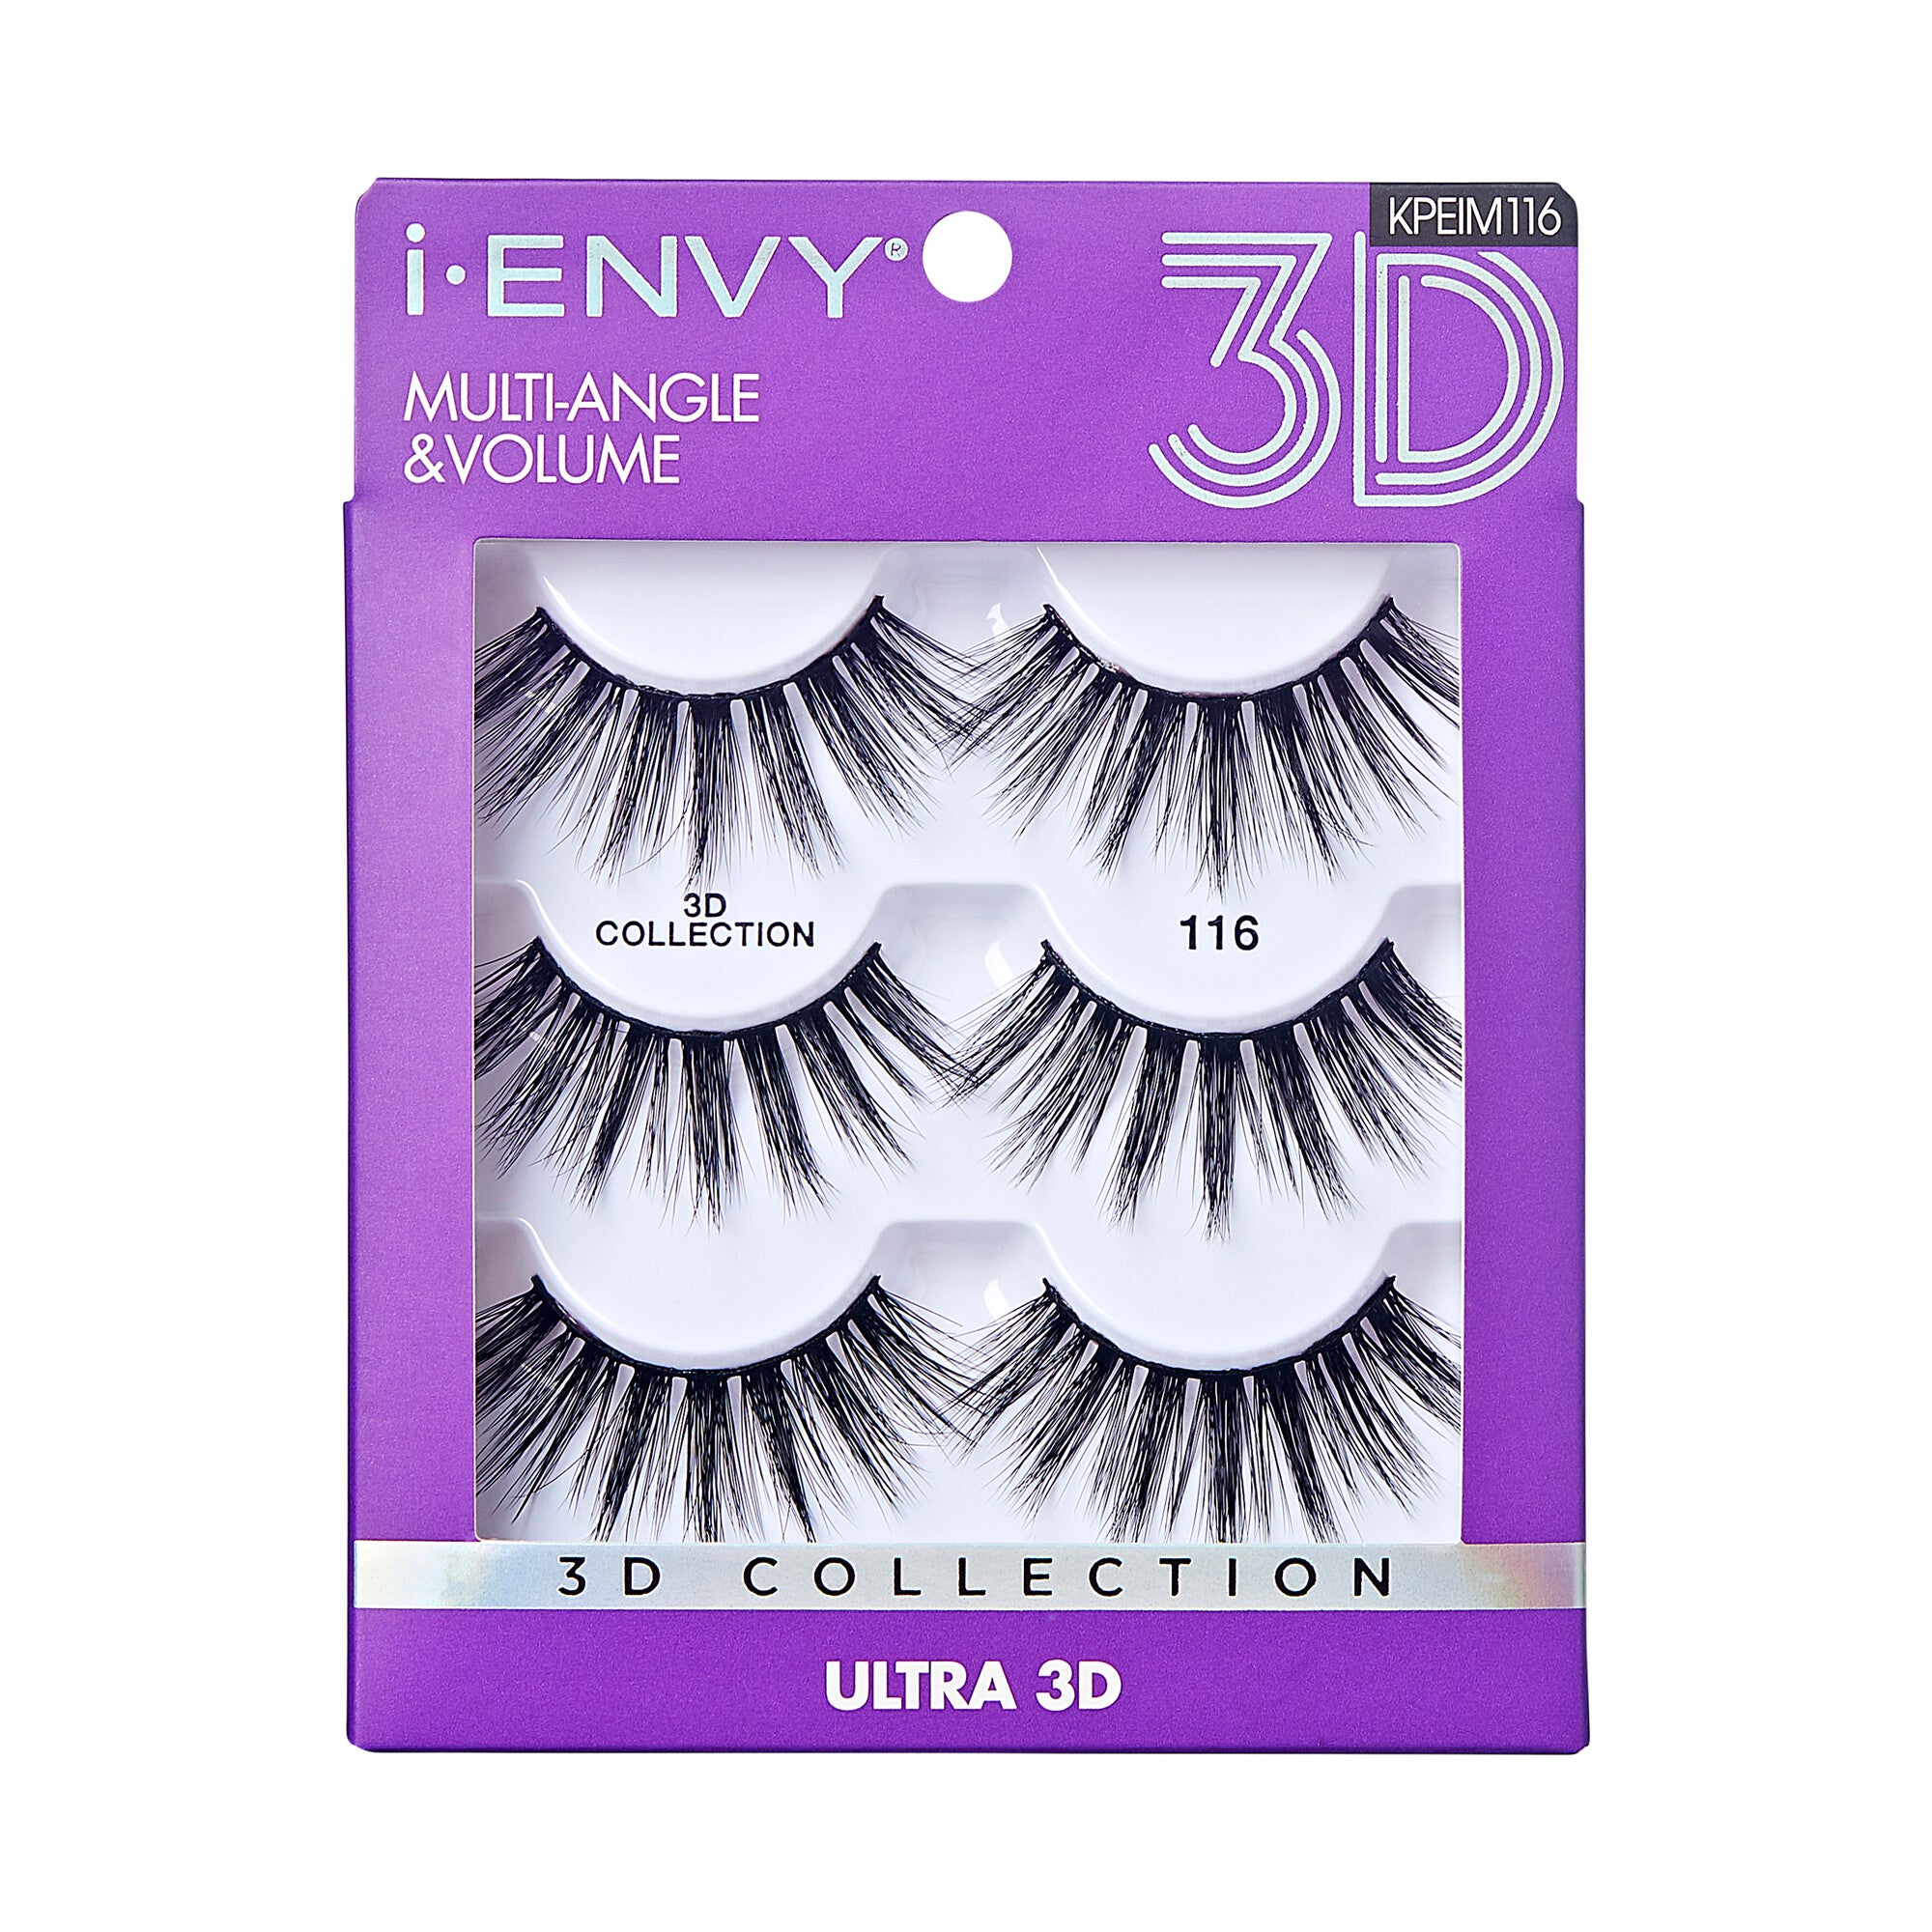 I.Envy By Kiss 3D Lashes Multi Pack Multiangle & Volume Collection-116 (KPEIM116)